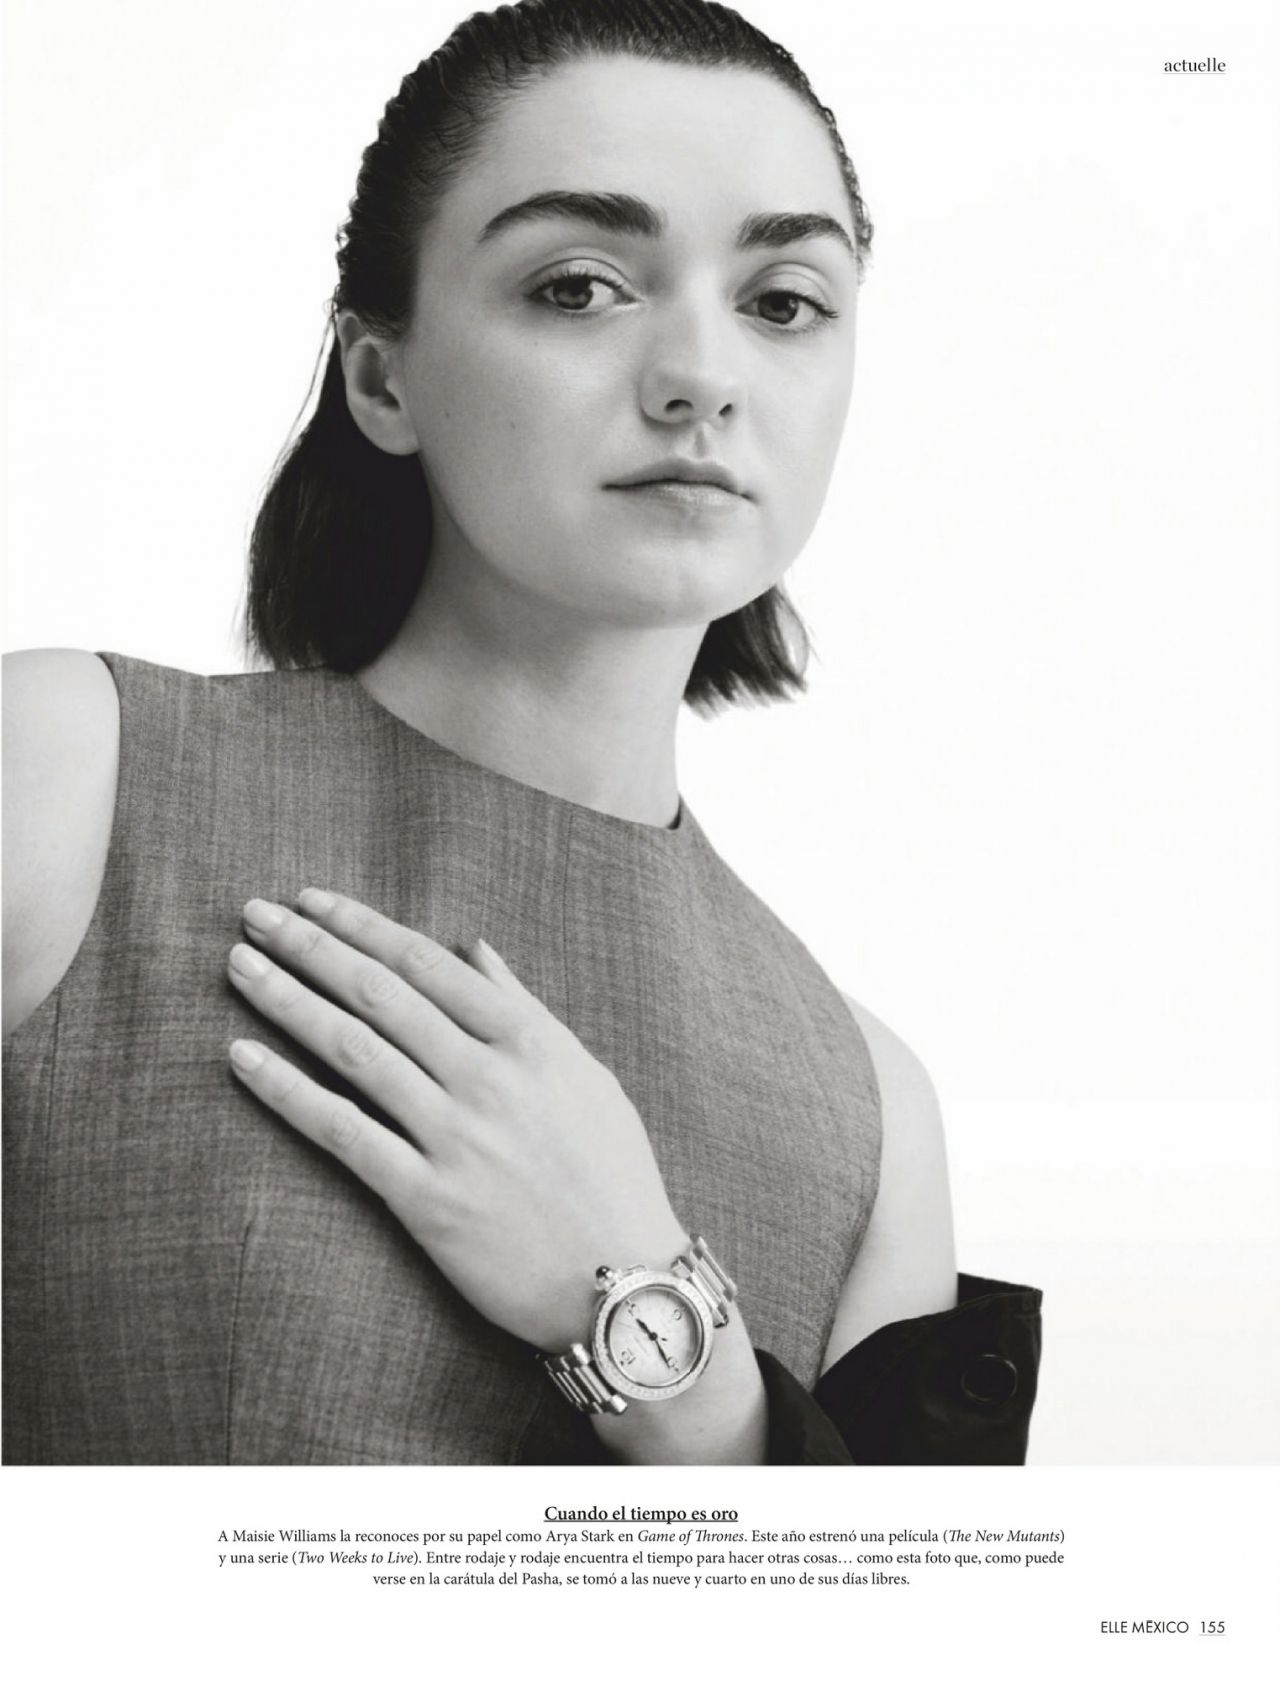 maisie-williams-cartier-promoting-pasha-watch-campaign-2020-4-3.jpg